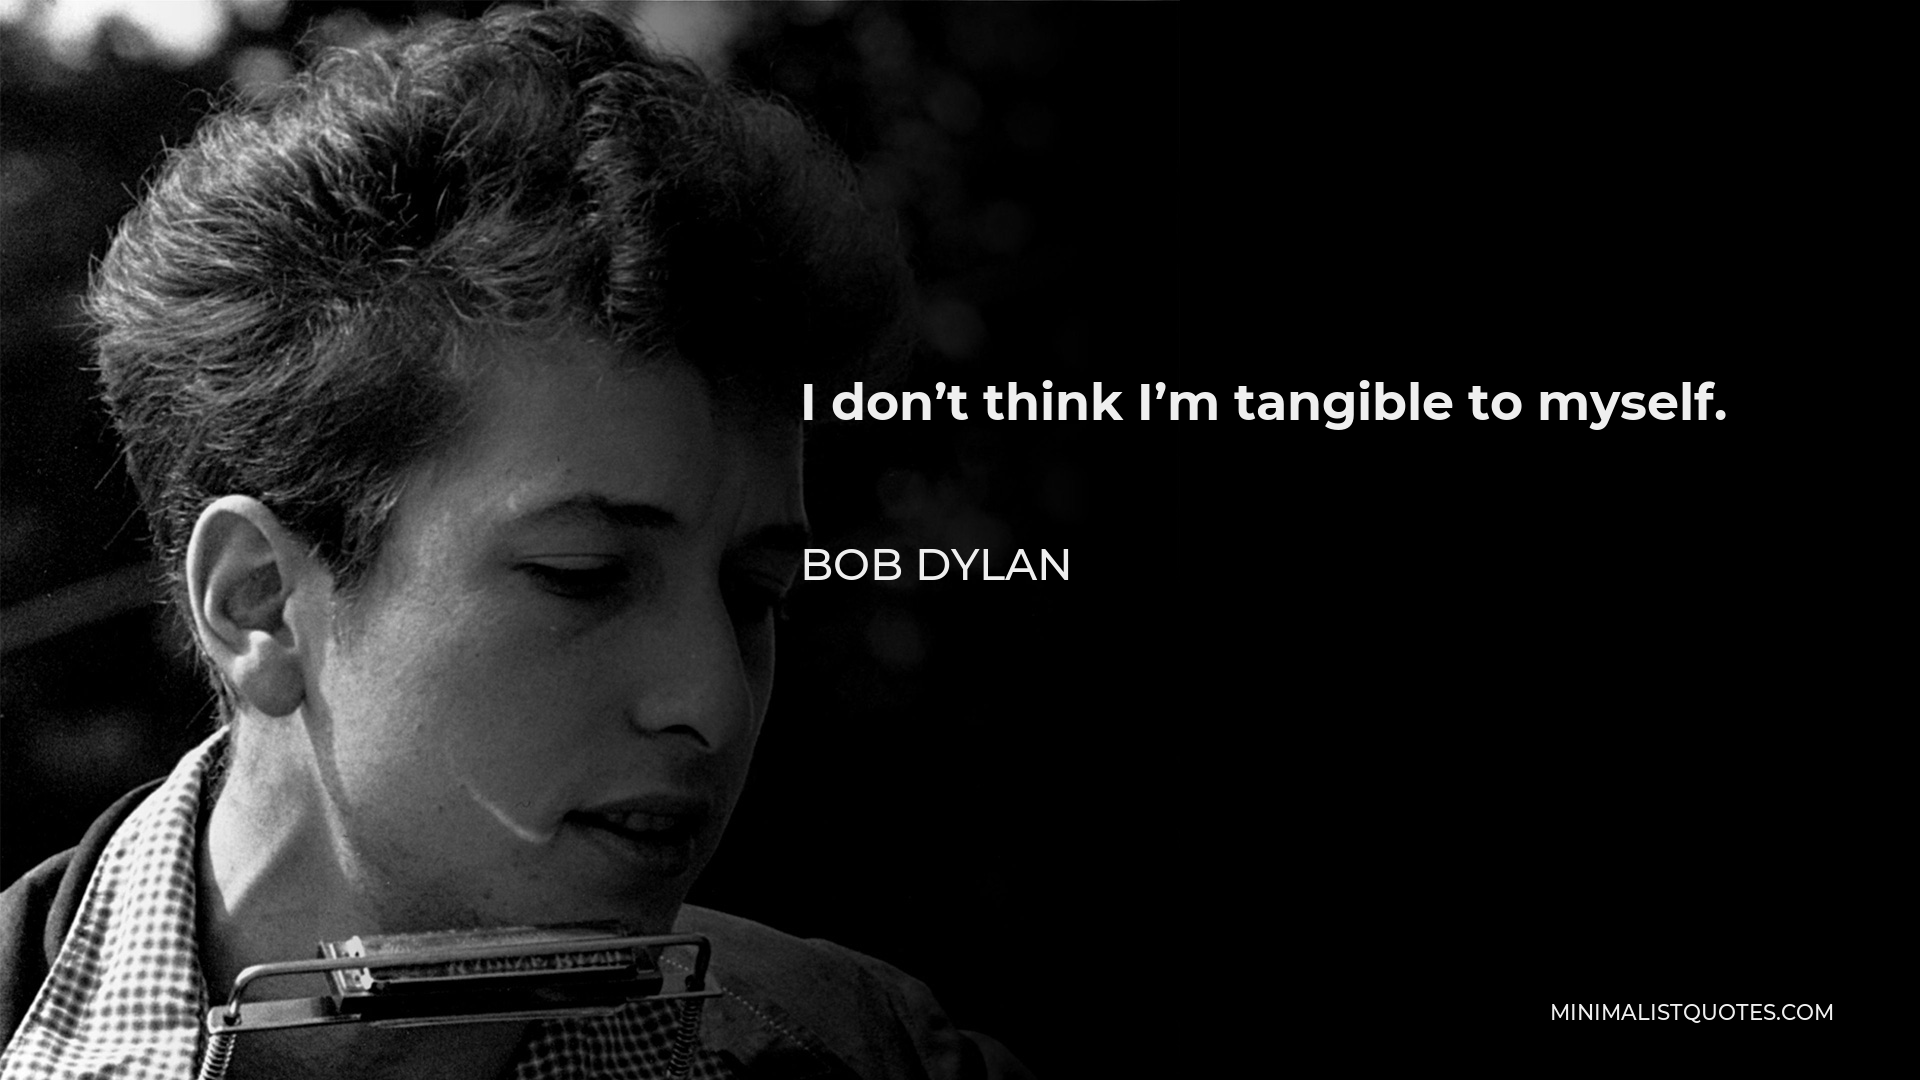 Bob Dylan Quote - I don’t think I’m tangible to myself.